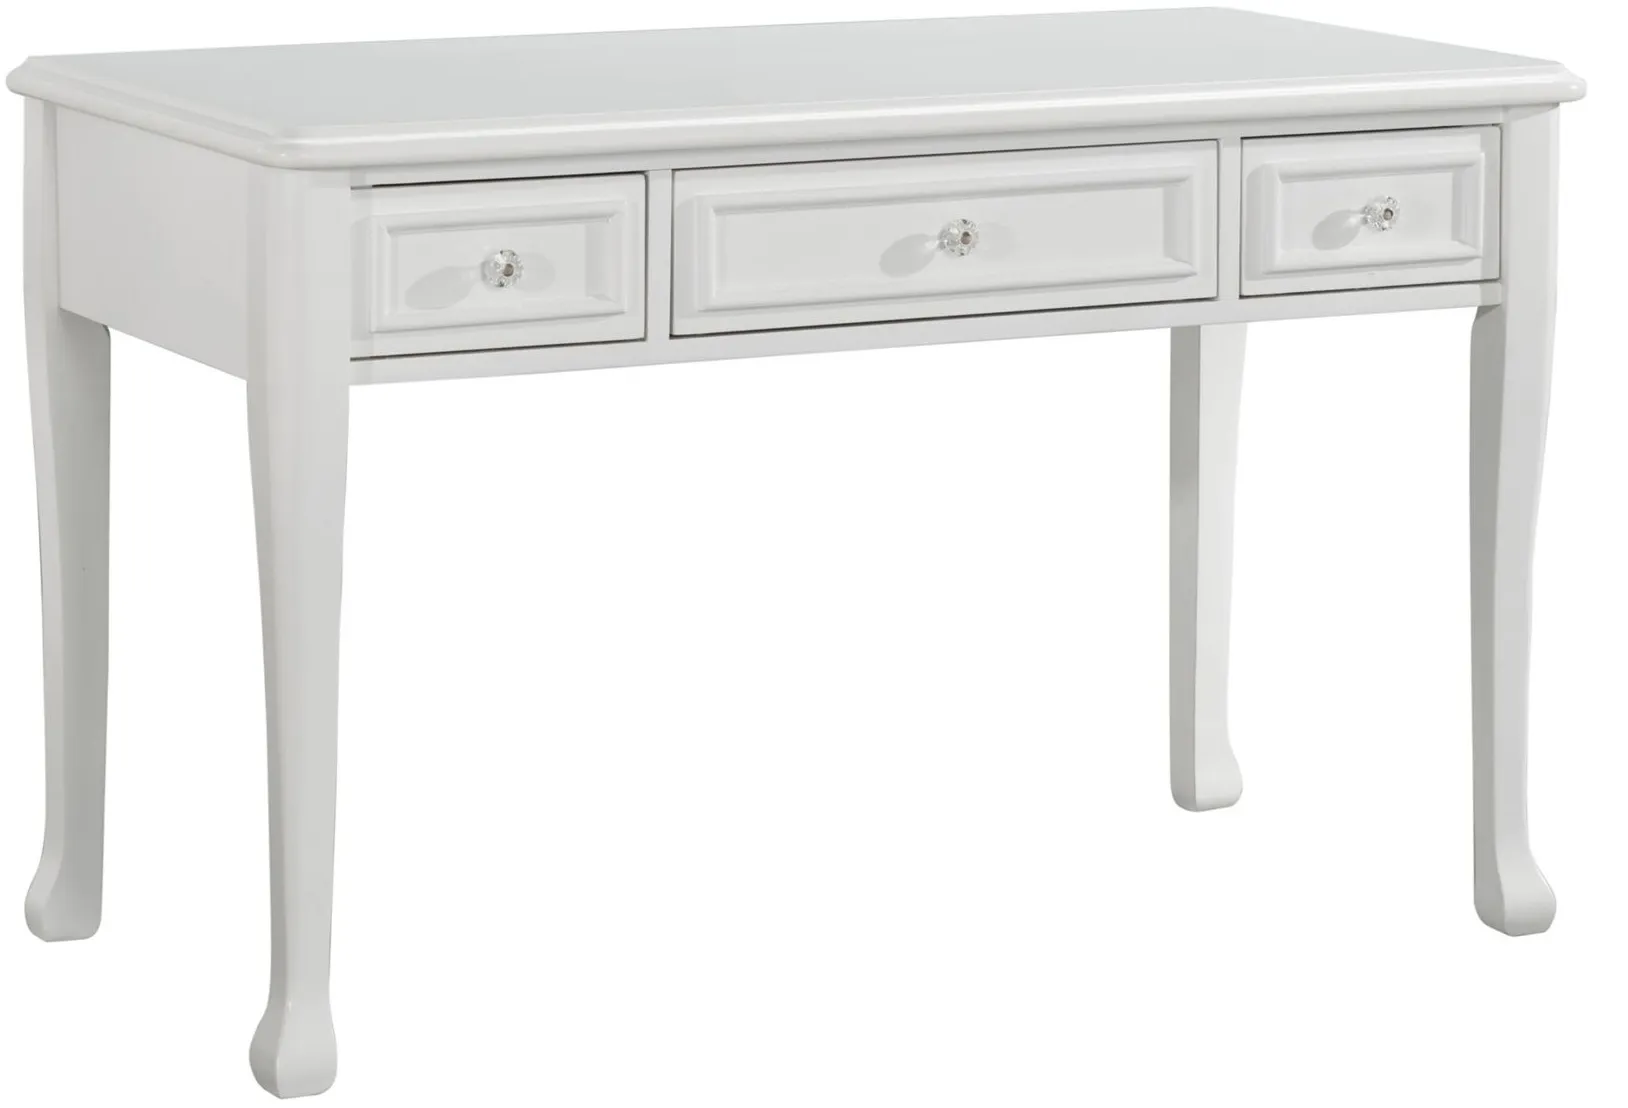 Jenna 3 Drawer Desk in White by Elements International Group